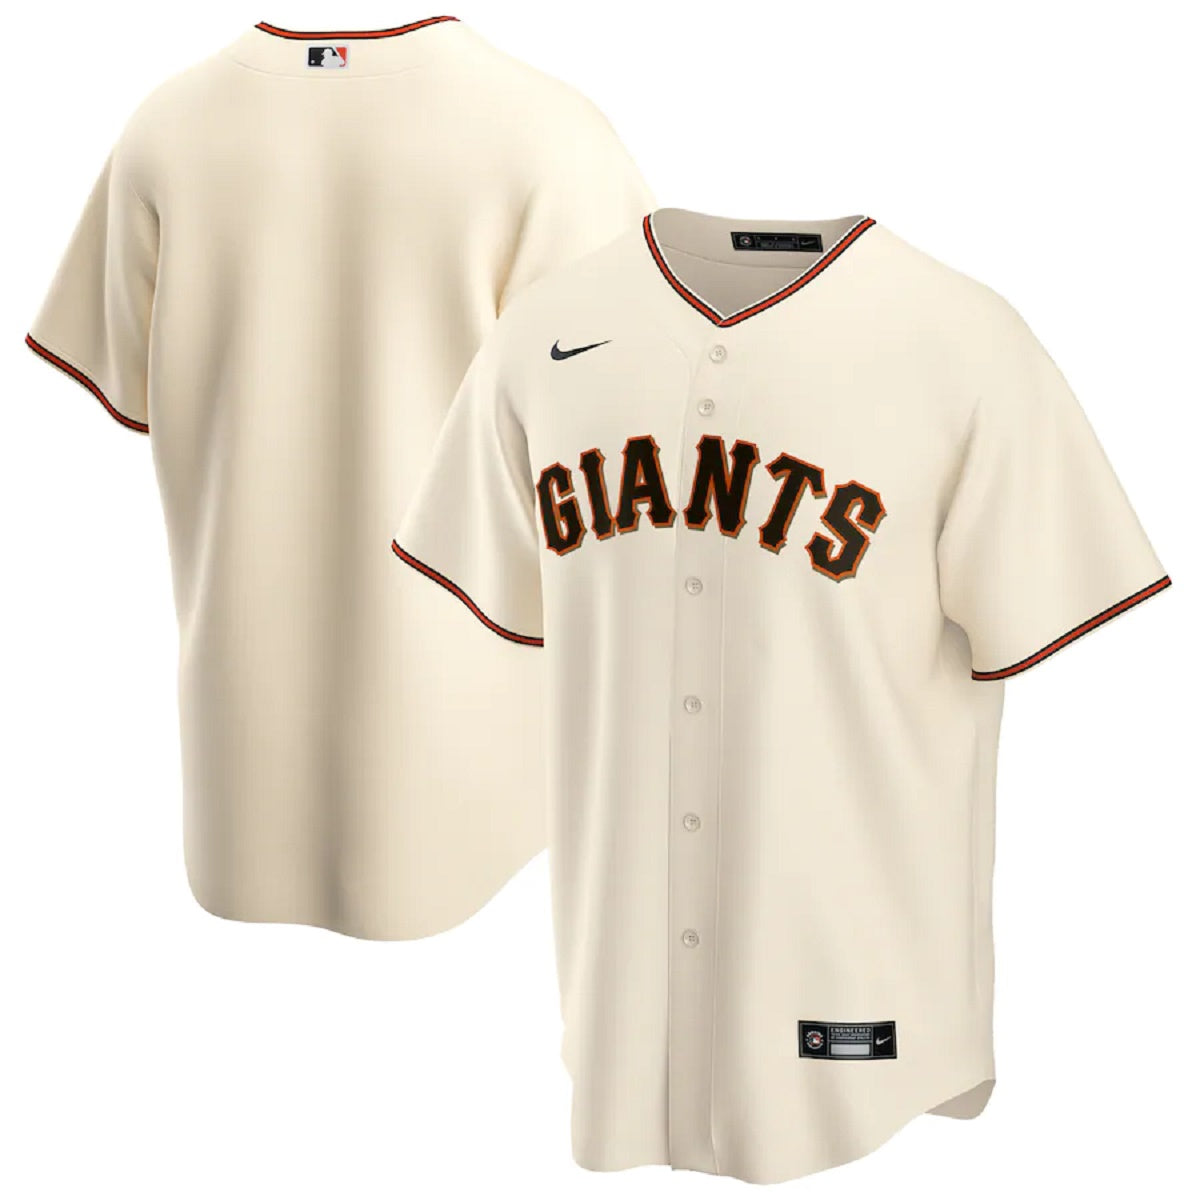 sf giants official jersey